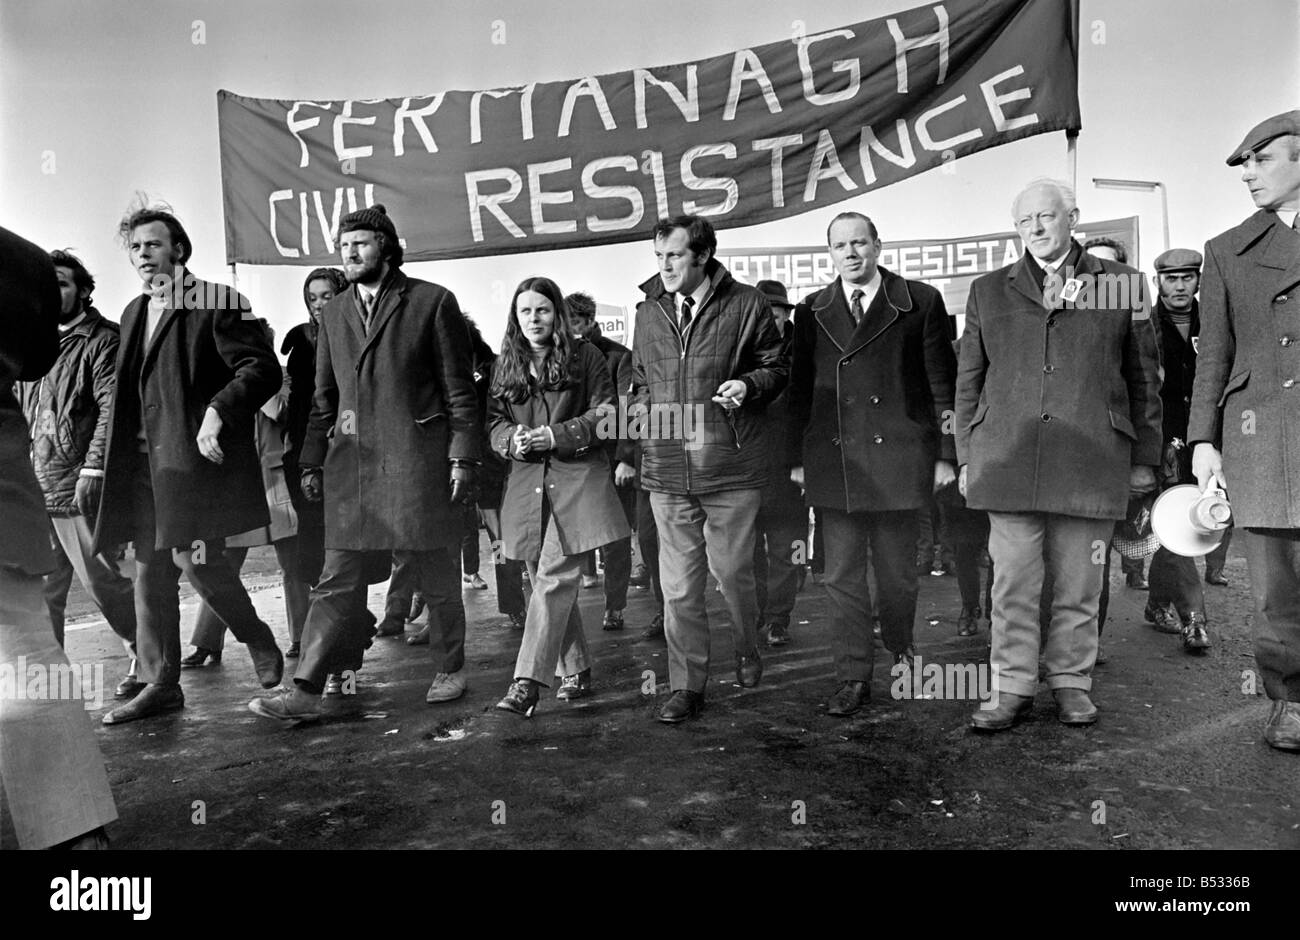 Enniskillen. Miss Bernadette Devlin marches with Paddy Kennedy MP. who is on the wanted list in Northern. Ireland February 1972 Stock Photo